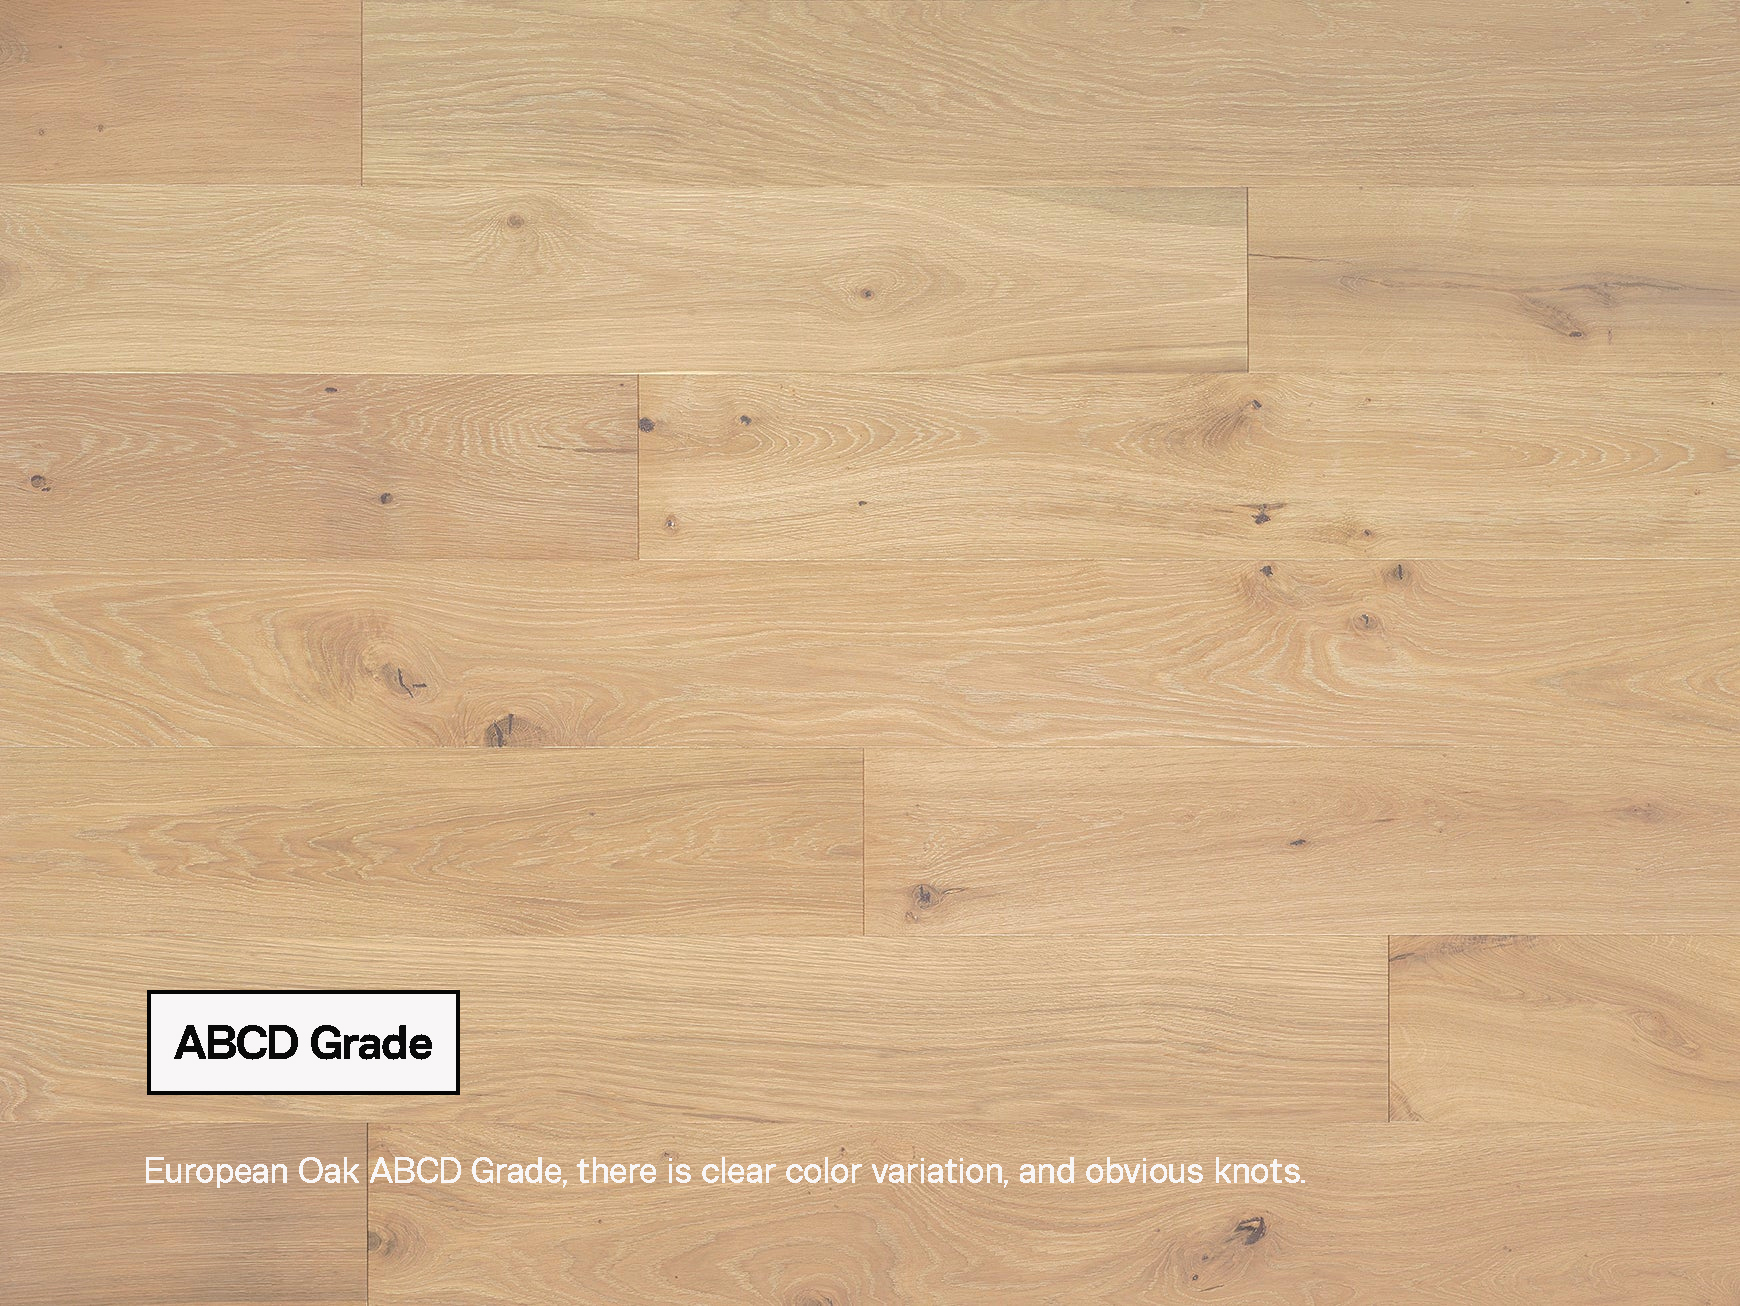 European Oak ABCD Grade, there is clear color variation, and obvious knots. 